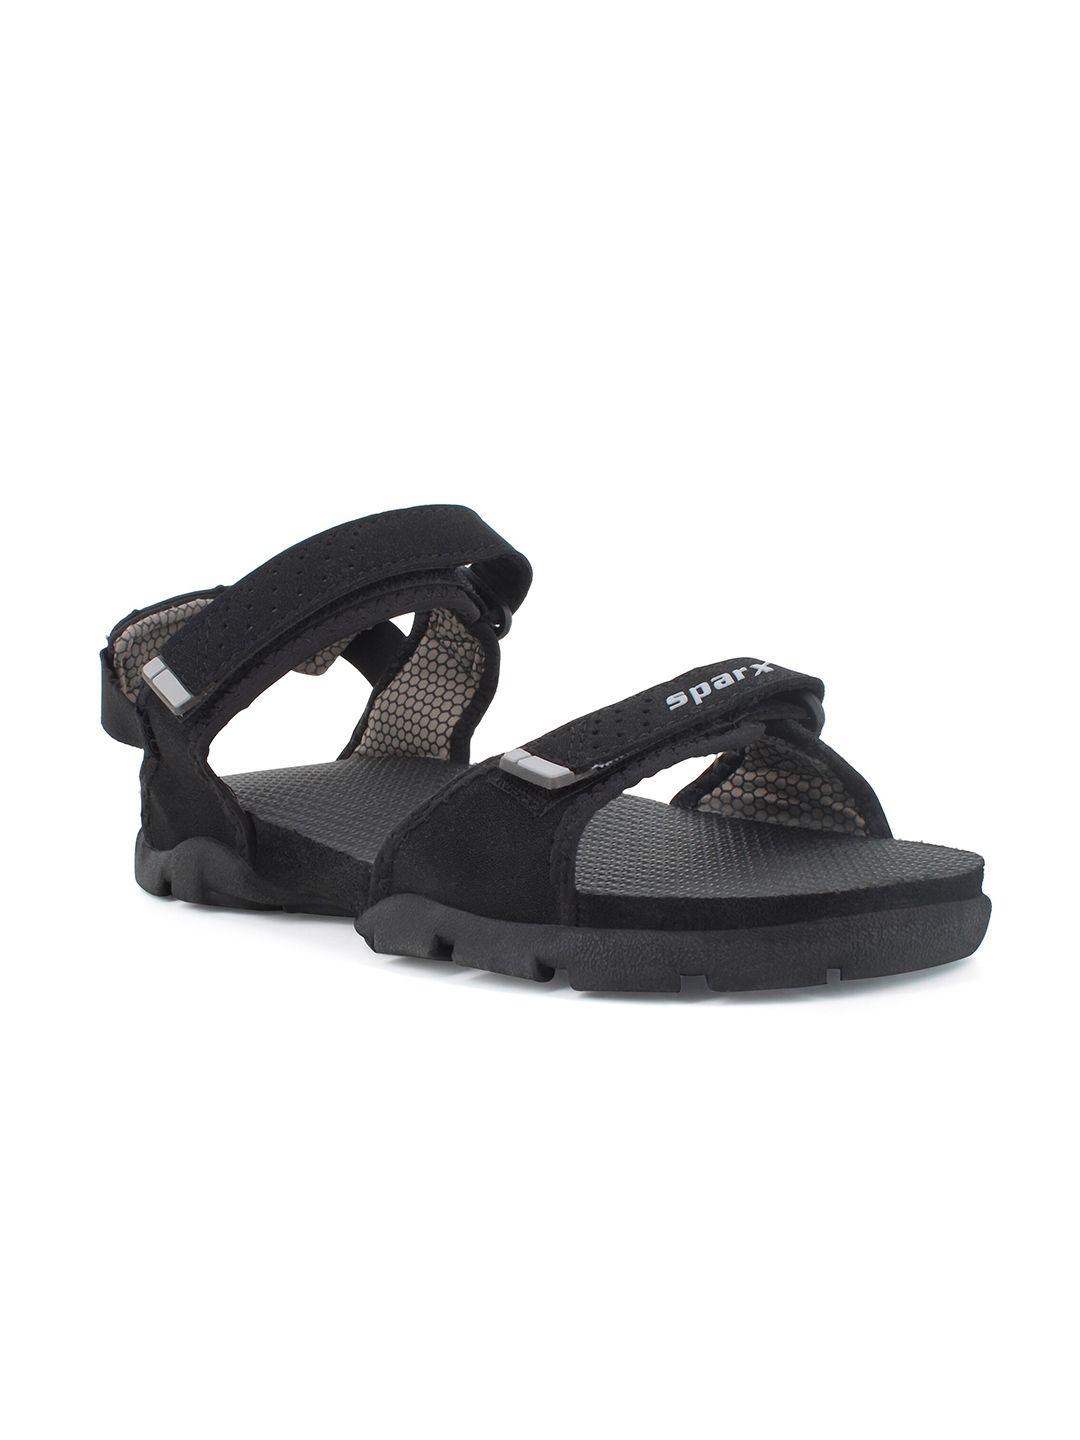 sparx kids textured sports sandals with velcro closure